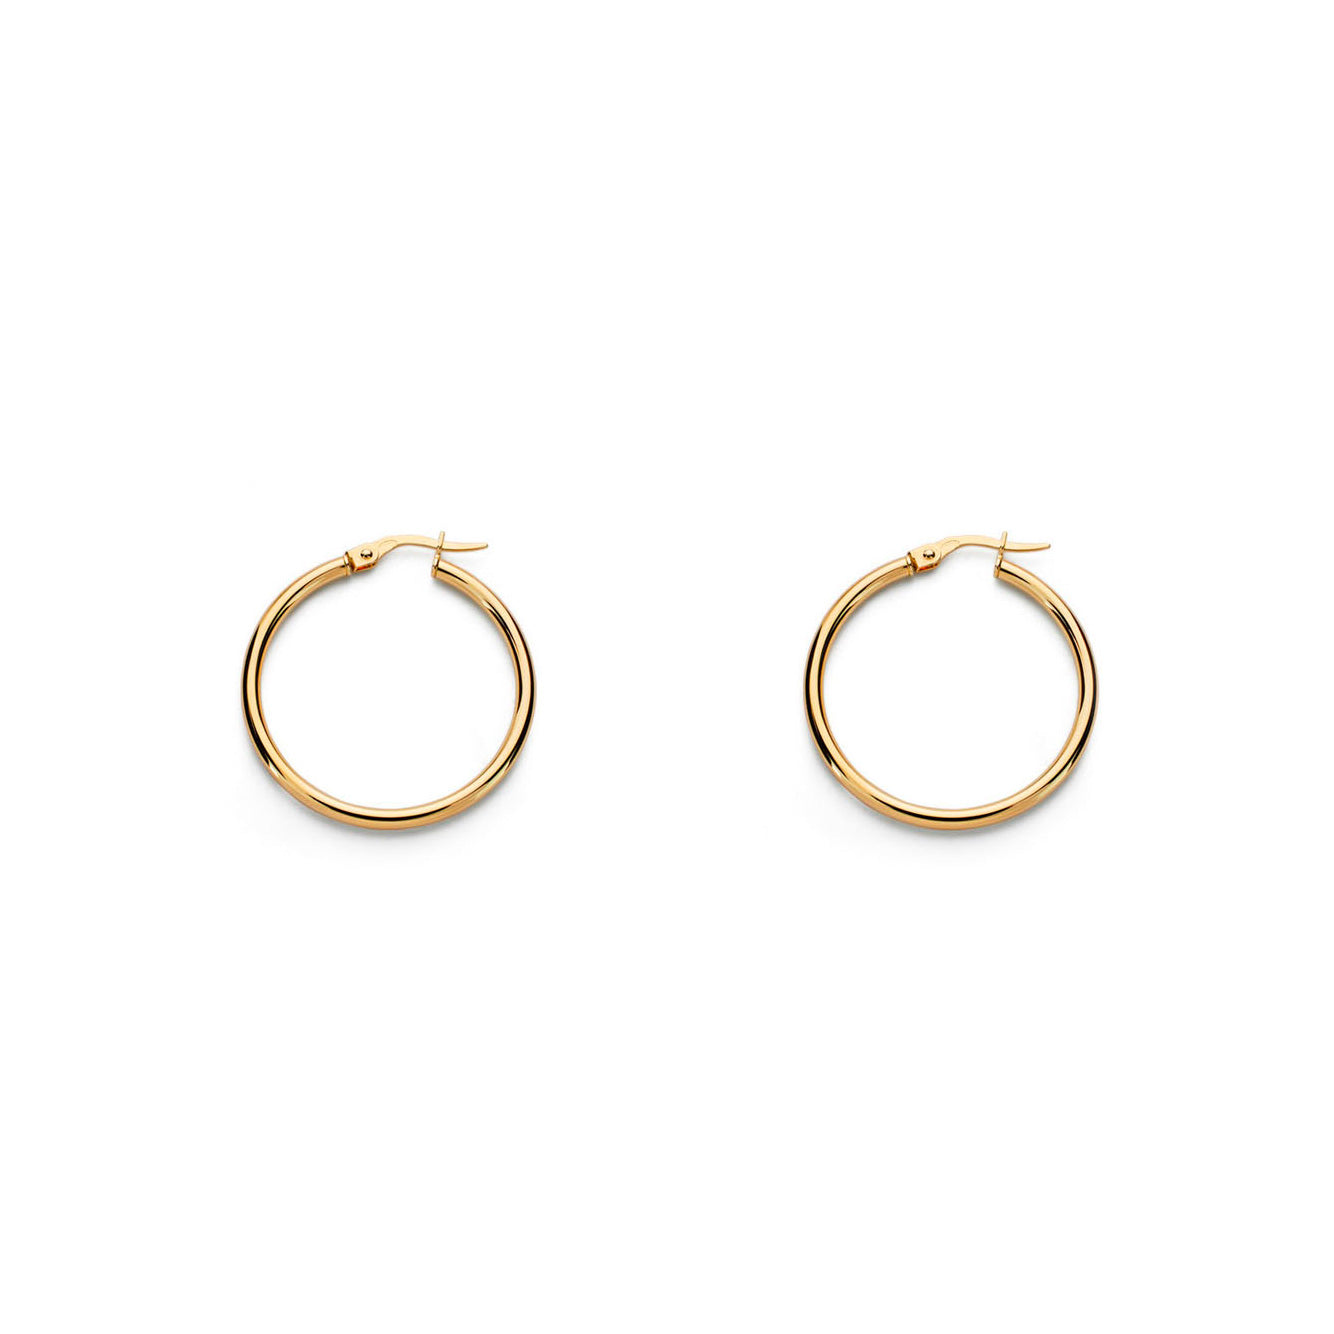 9K Yellow Gold Earrings Round Shiny Hoops 23 x 1.5 mm